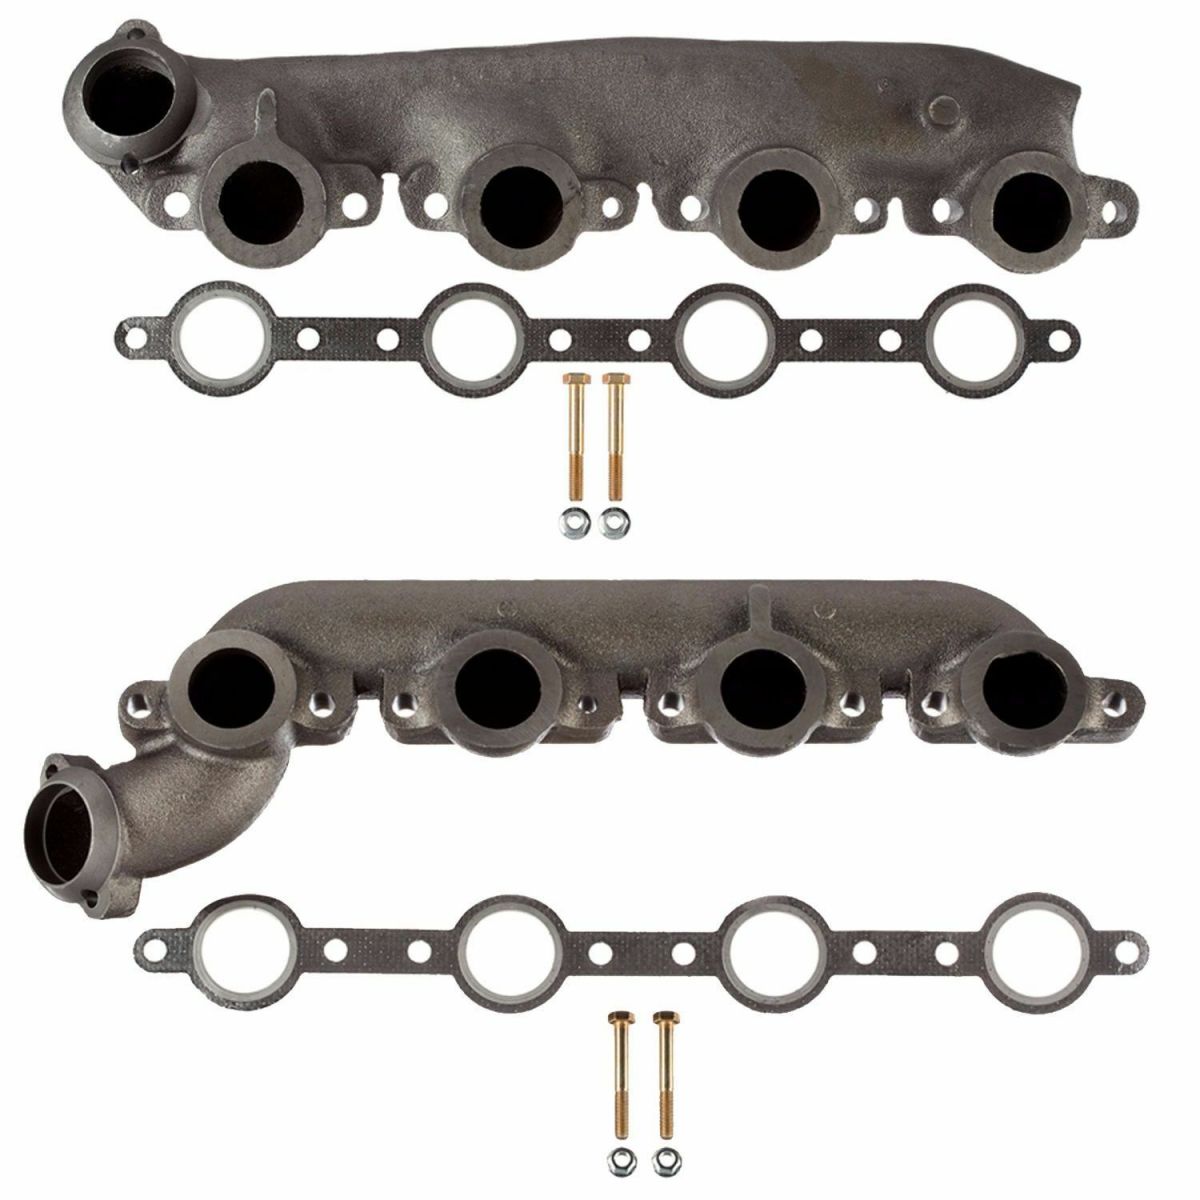 Rudy's Performance Parts - Rudy's Replacement Exhaust Manifold Kit For 99-03 7.3 Powerstroke